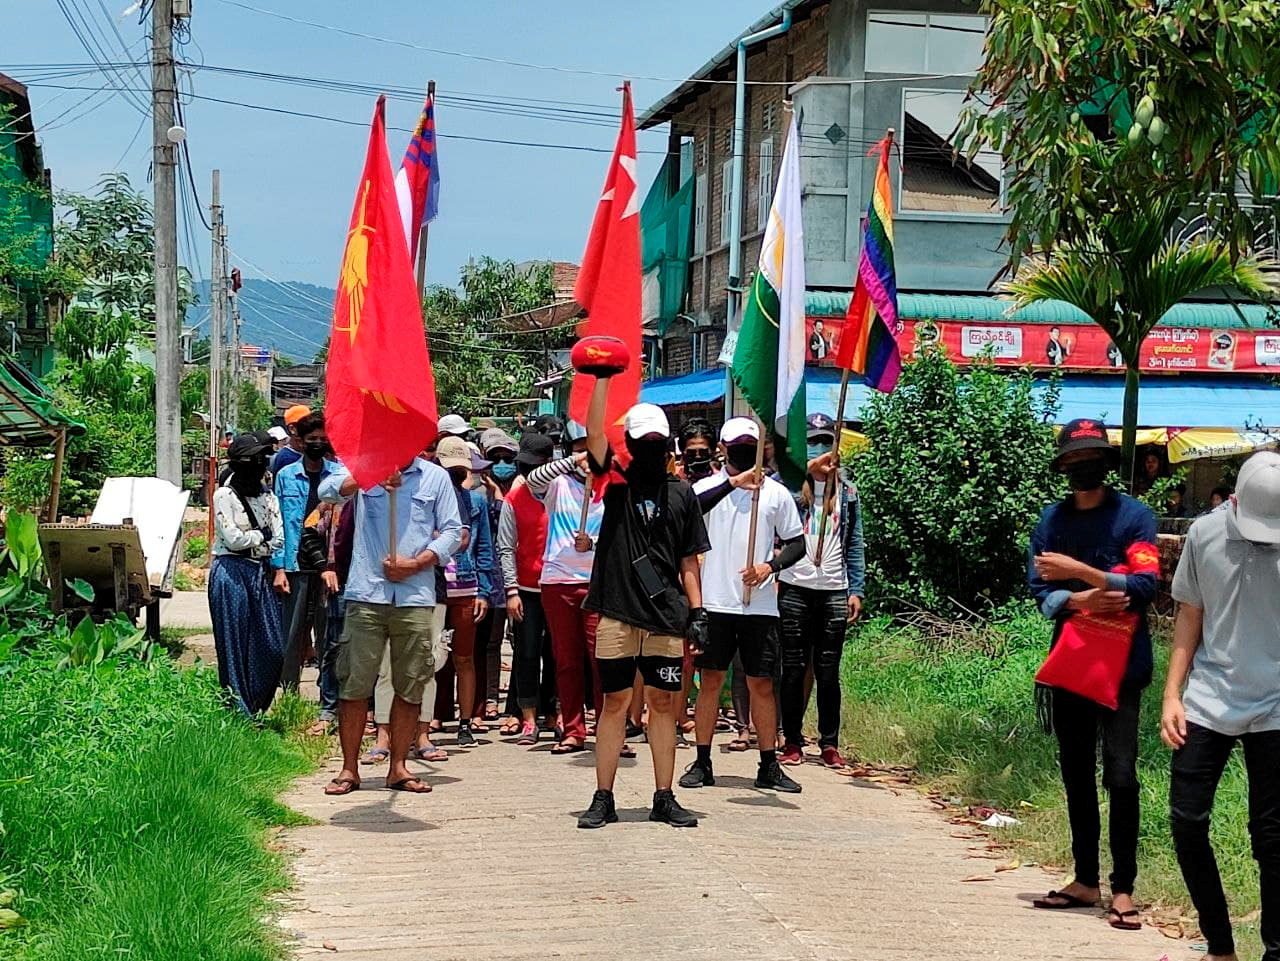 Demonstrators carry flags as they march to protest against the military coup, in Dawei, Myanmar April 27, 2021. Courtesy of Dawei Watch/via REUTERS   